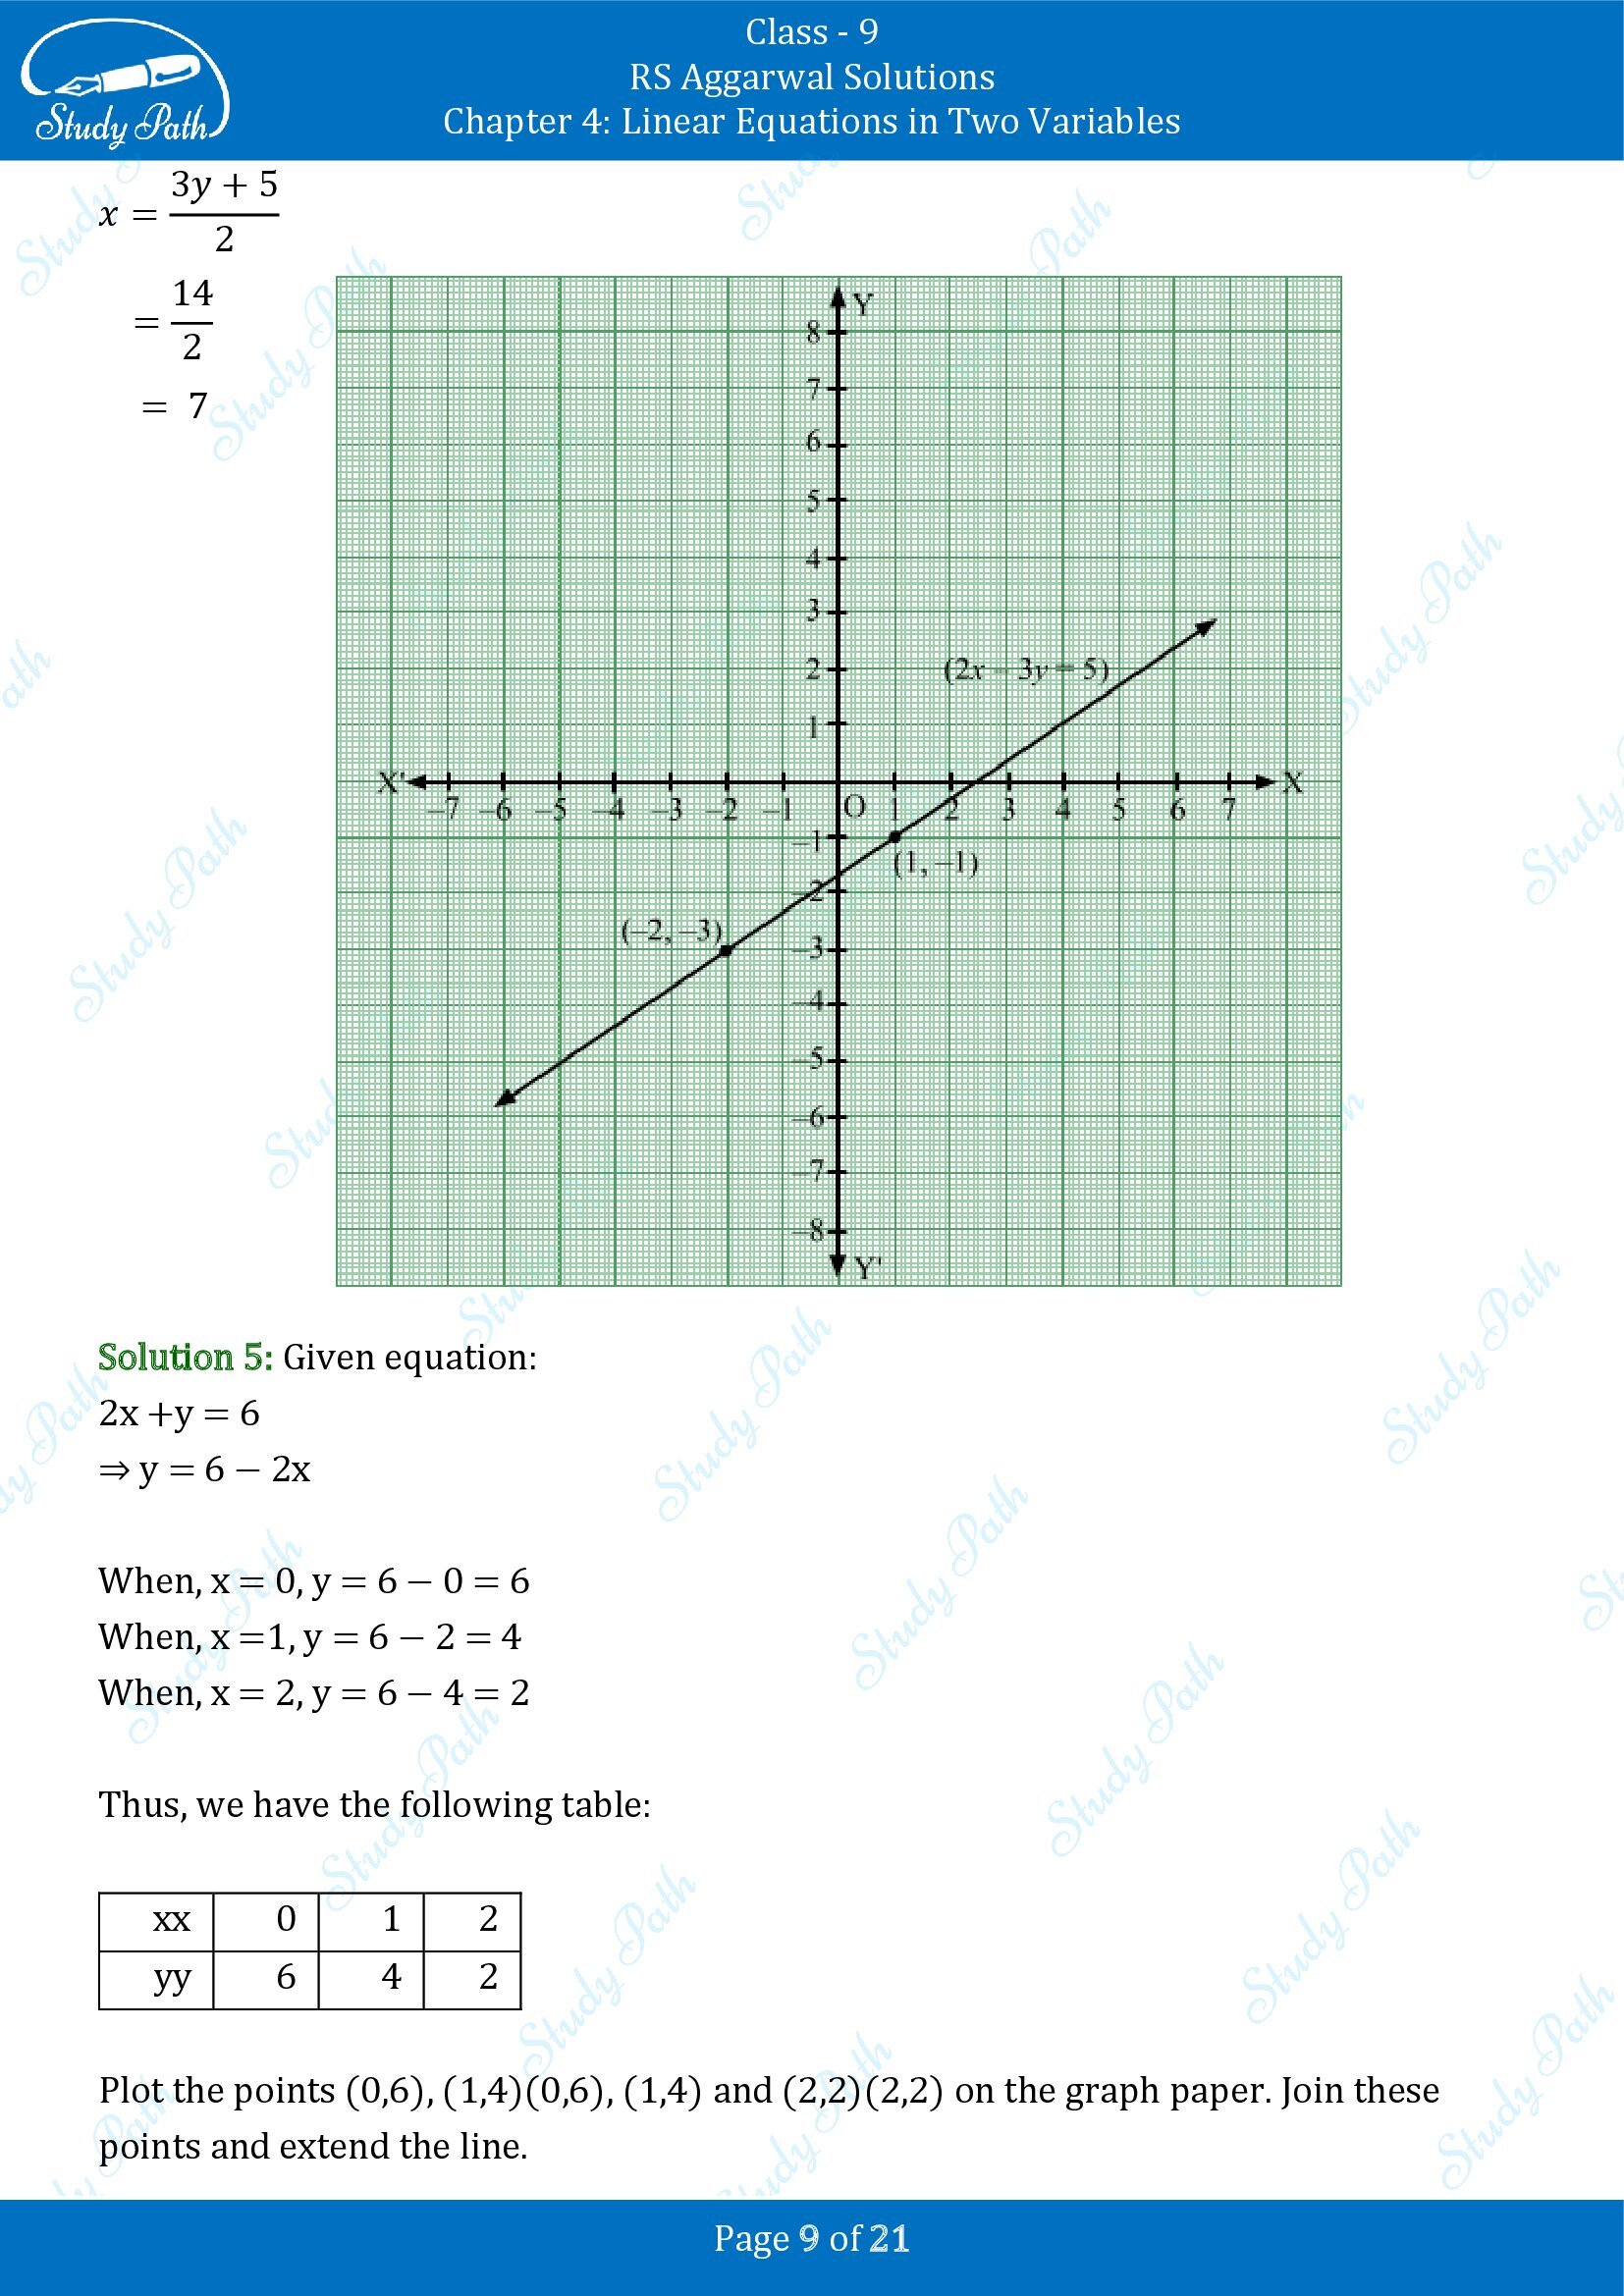 RS Aggarwal Solutions Class 9 Chapter 4 Linear Equations in Two Variables Exercise 4B 00009